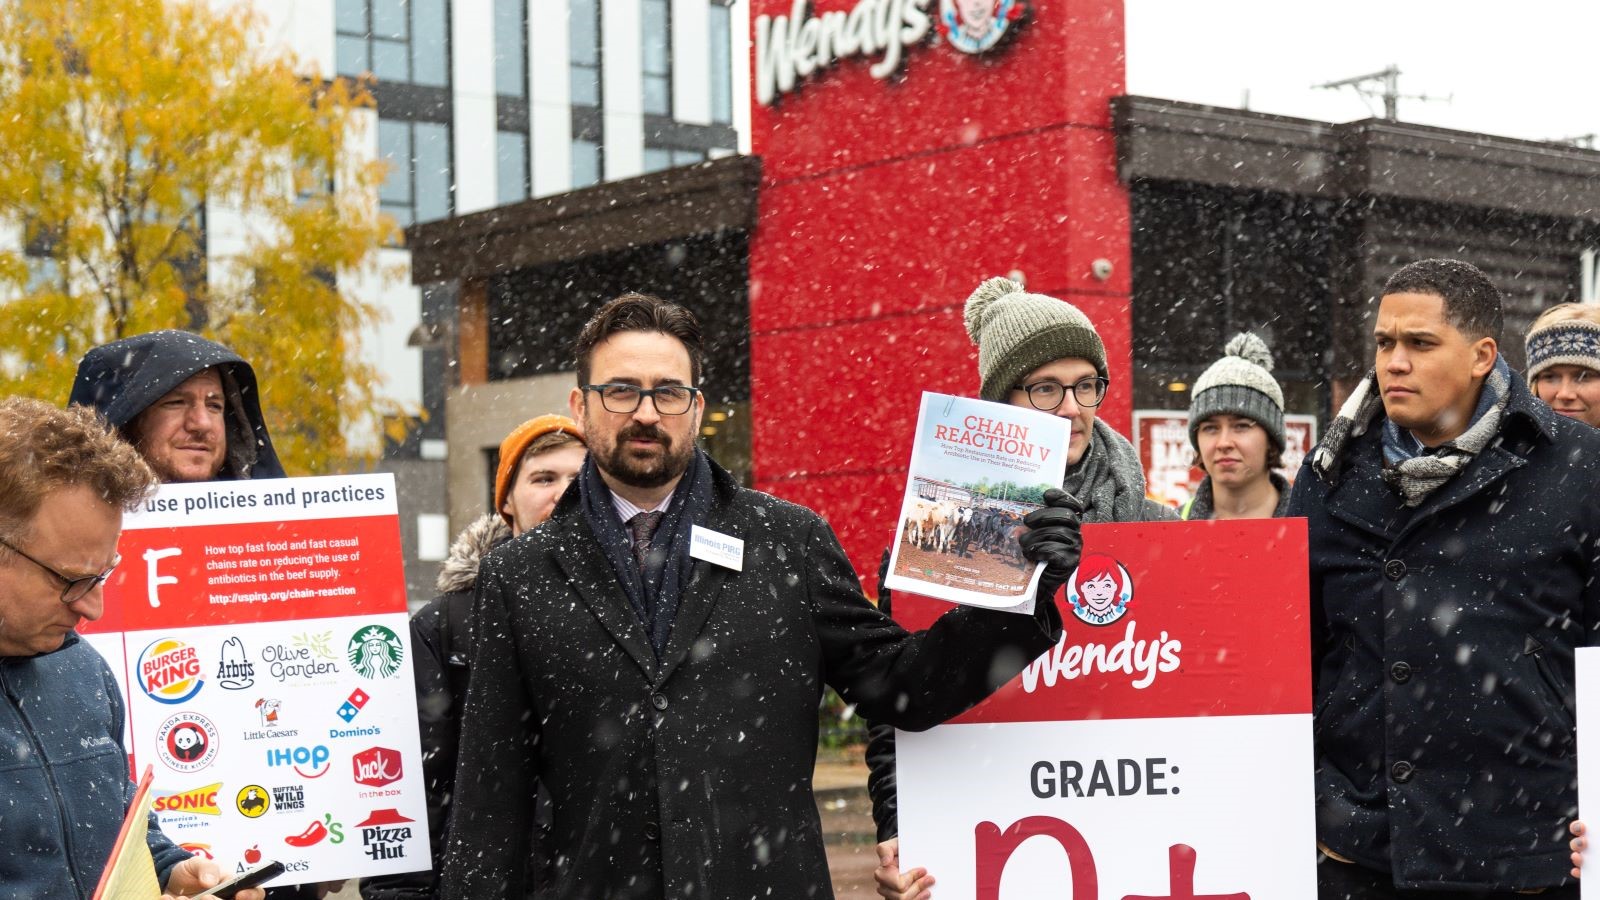 Advocates gathered outside a Wendy's to release a scorecard grading corporate policies to stop the overuse of antibiotics.